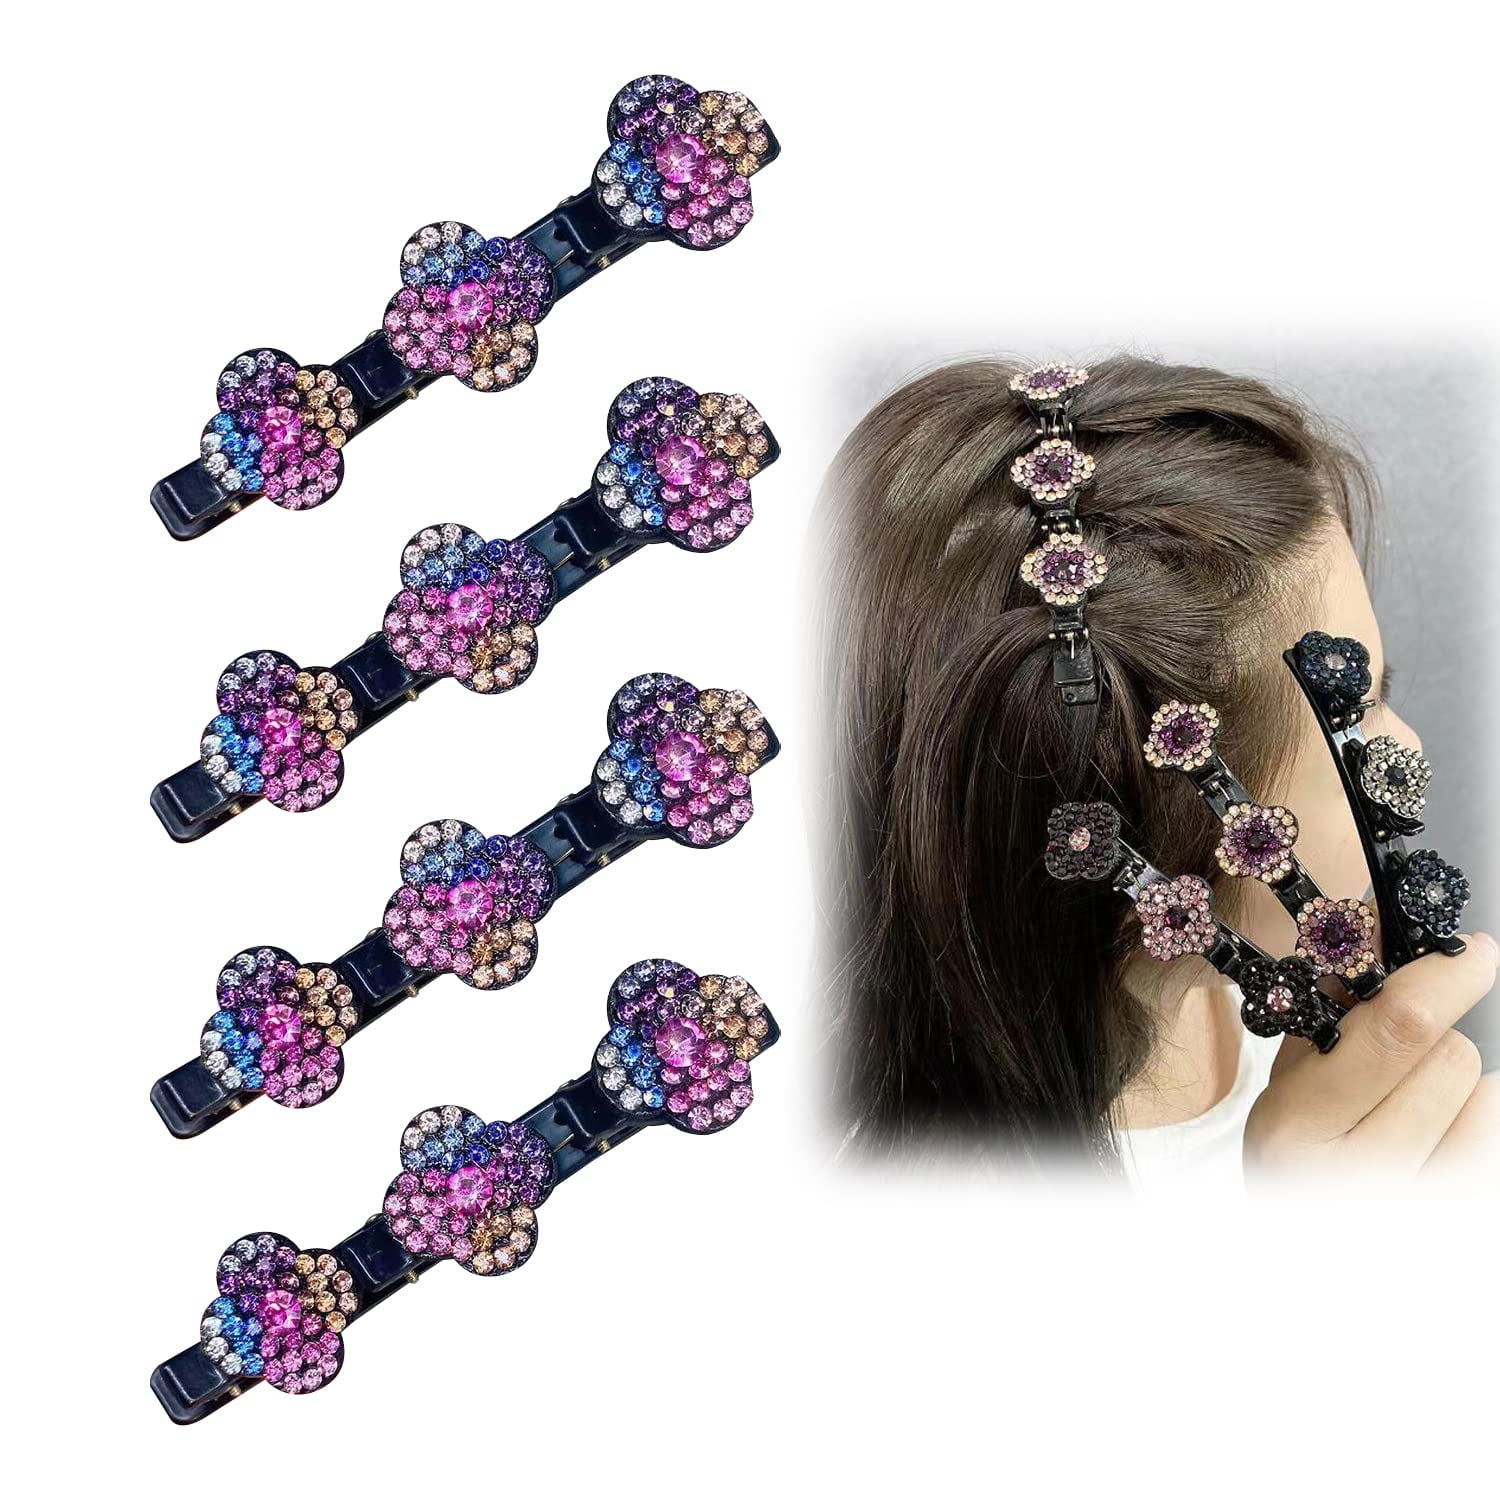 Sparkling Crystal Stone Braided Hair Clips, hair jewelry for